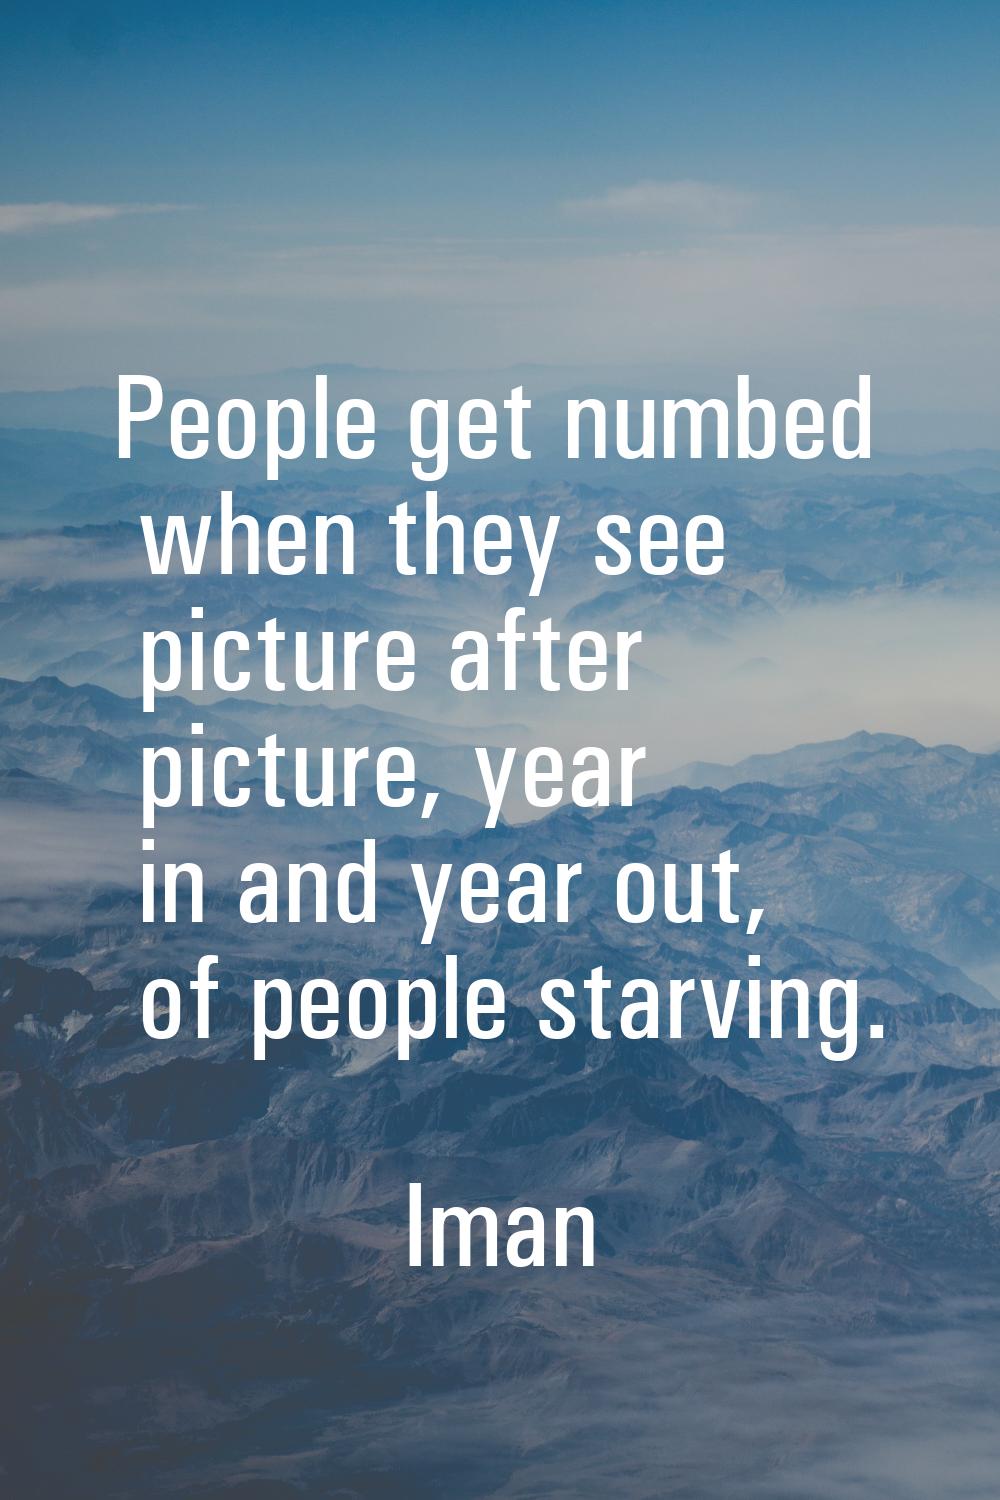 People get numbed when they see picture after picture, year in and year out, of people starving.